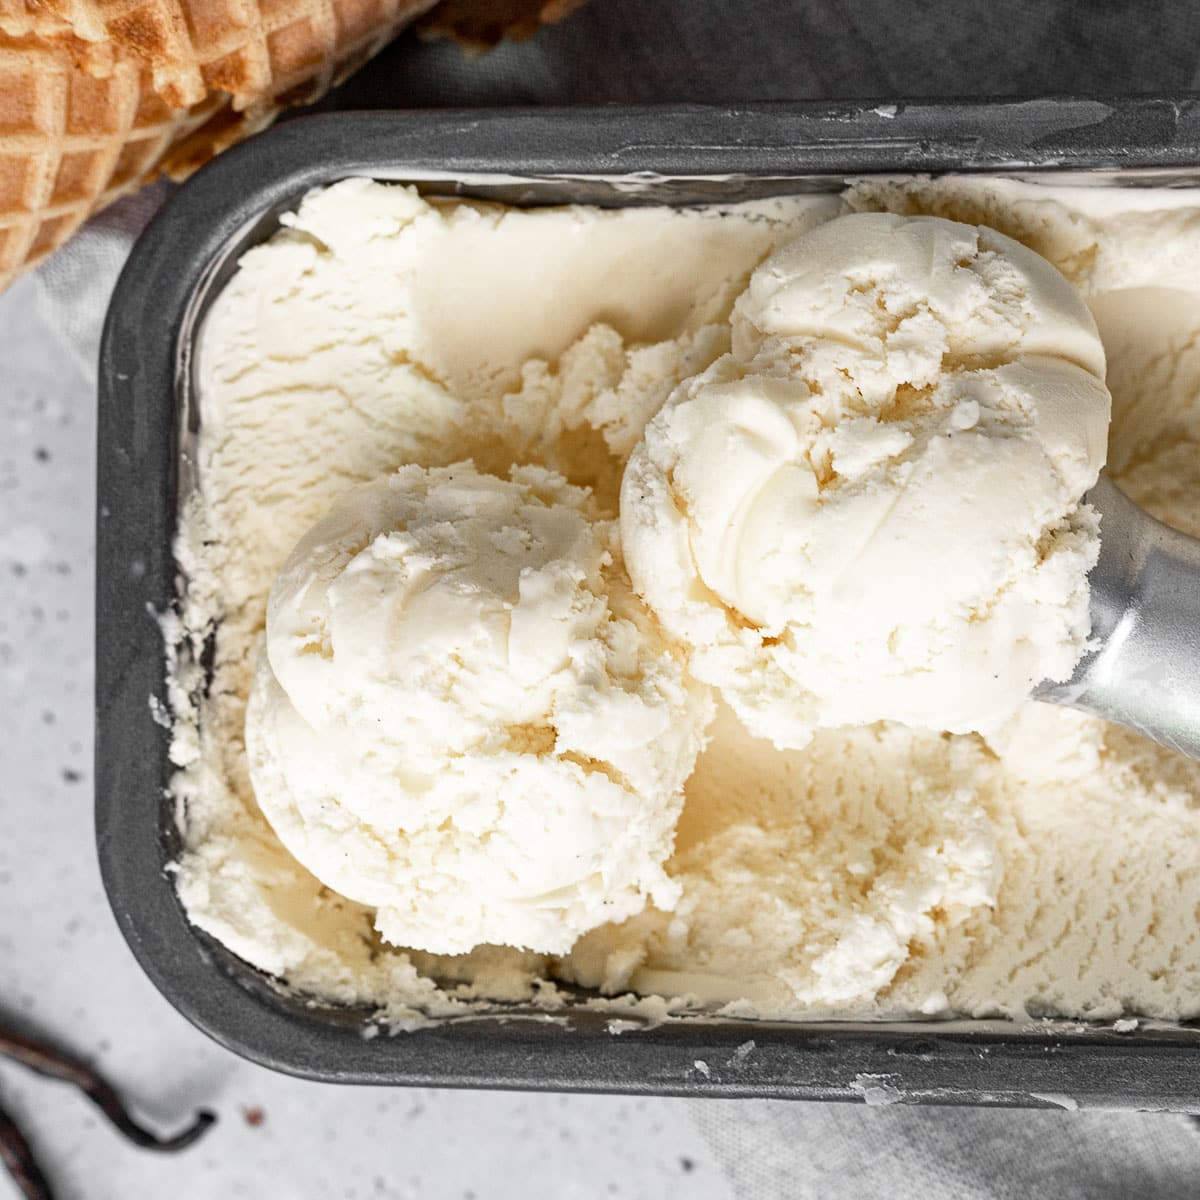 French Vanilla Ice Cream finished in loaf pan with scoops of ice cream and scoop on top